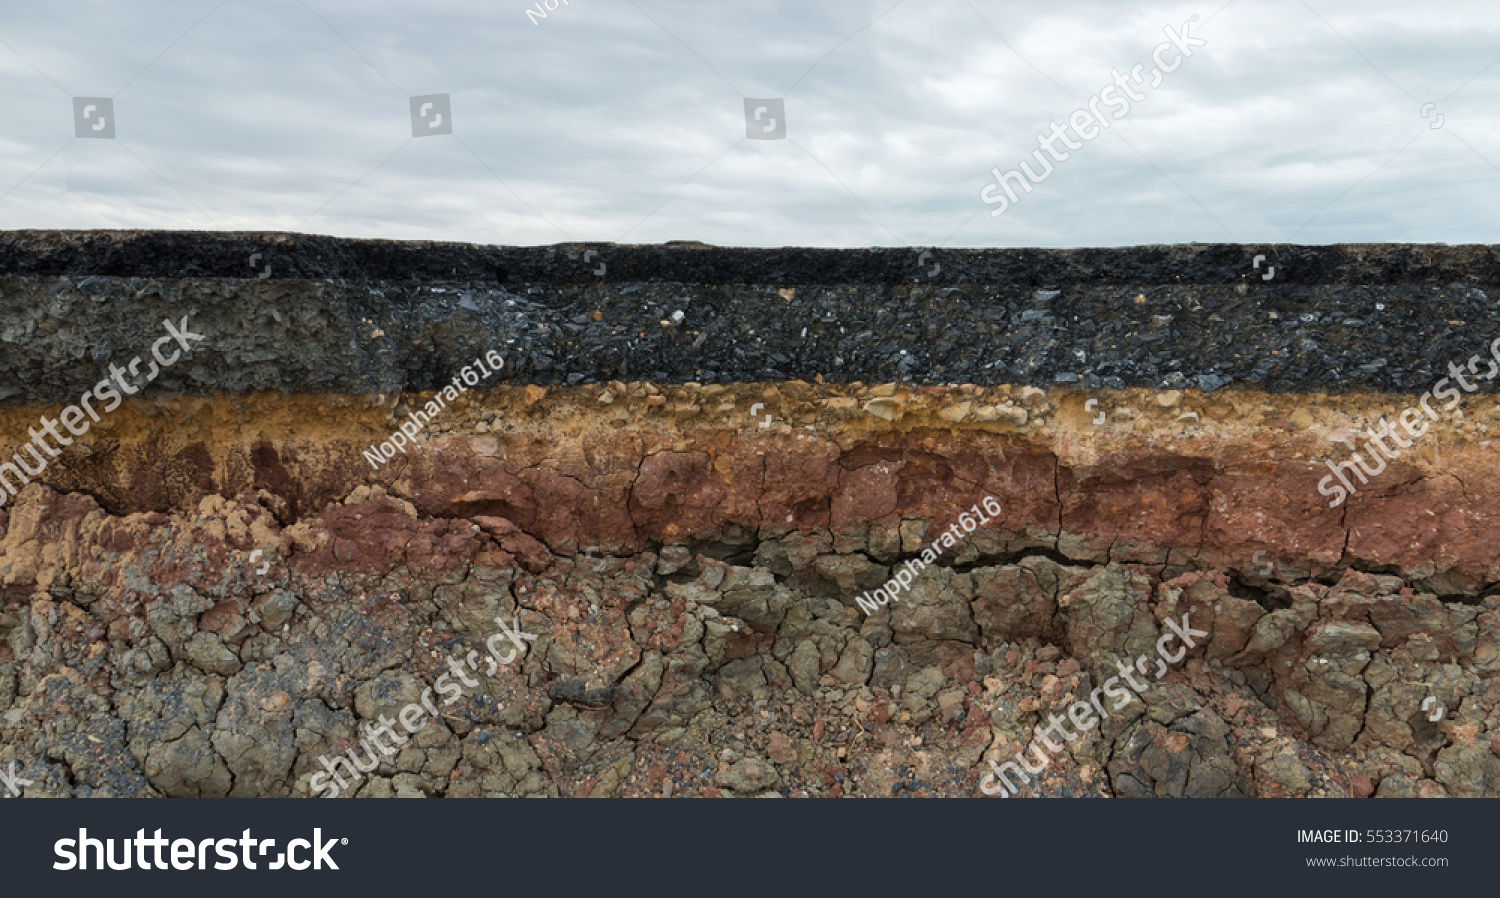 The layer of asphalt road with soil and rock. Un-focus image. #553371640